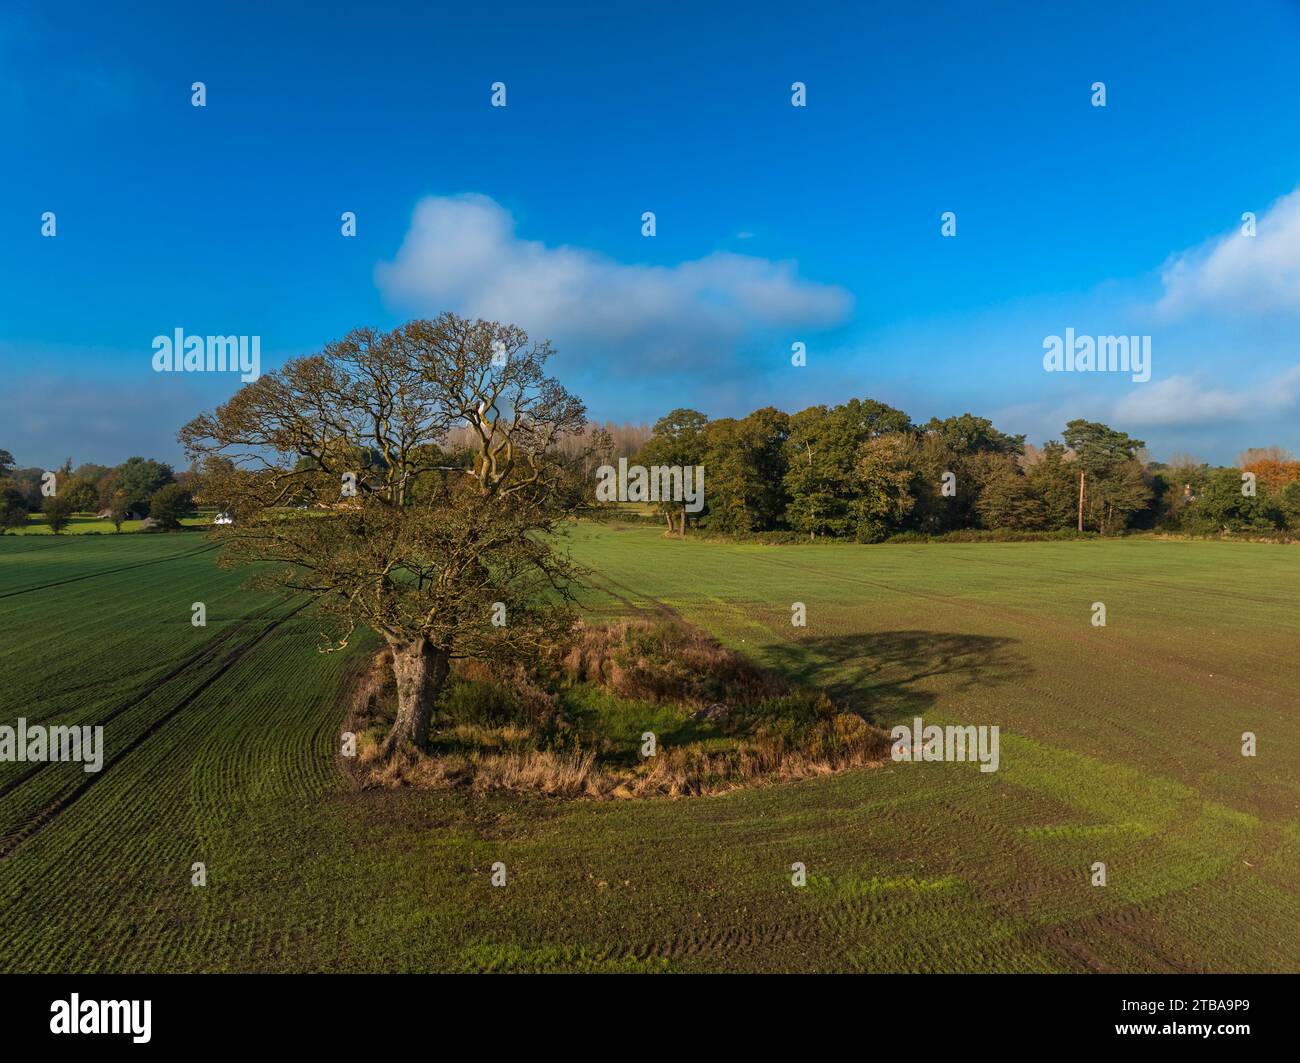 Aerial View of Solitary Tree in Meadow, Cheshire, England 2 Stock Photo